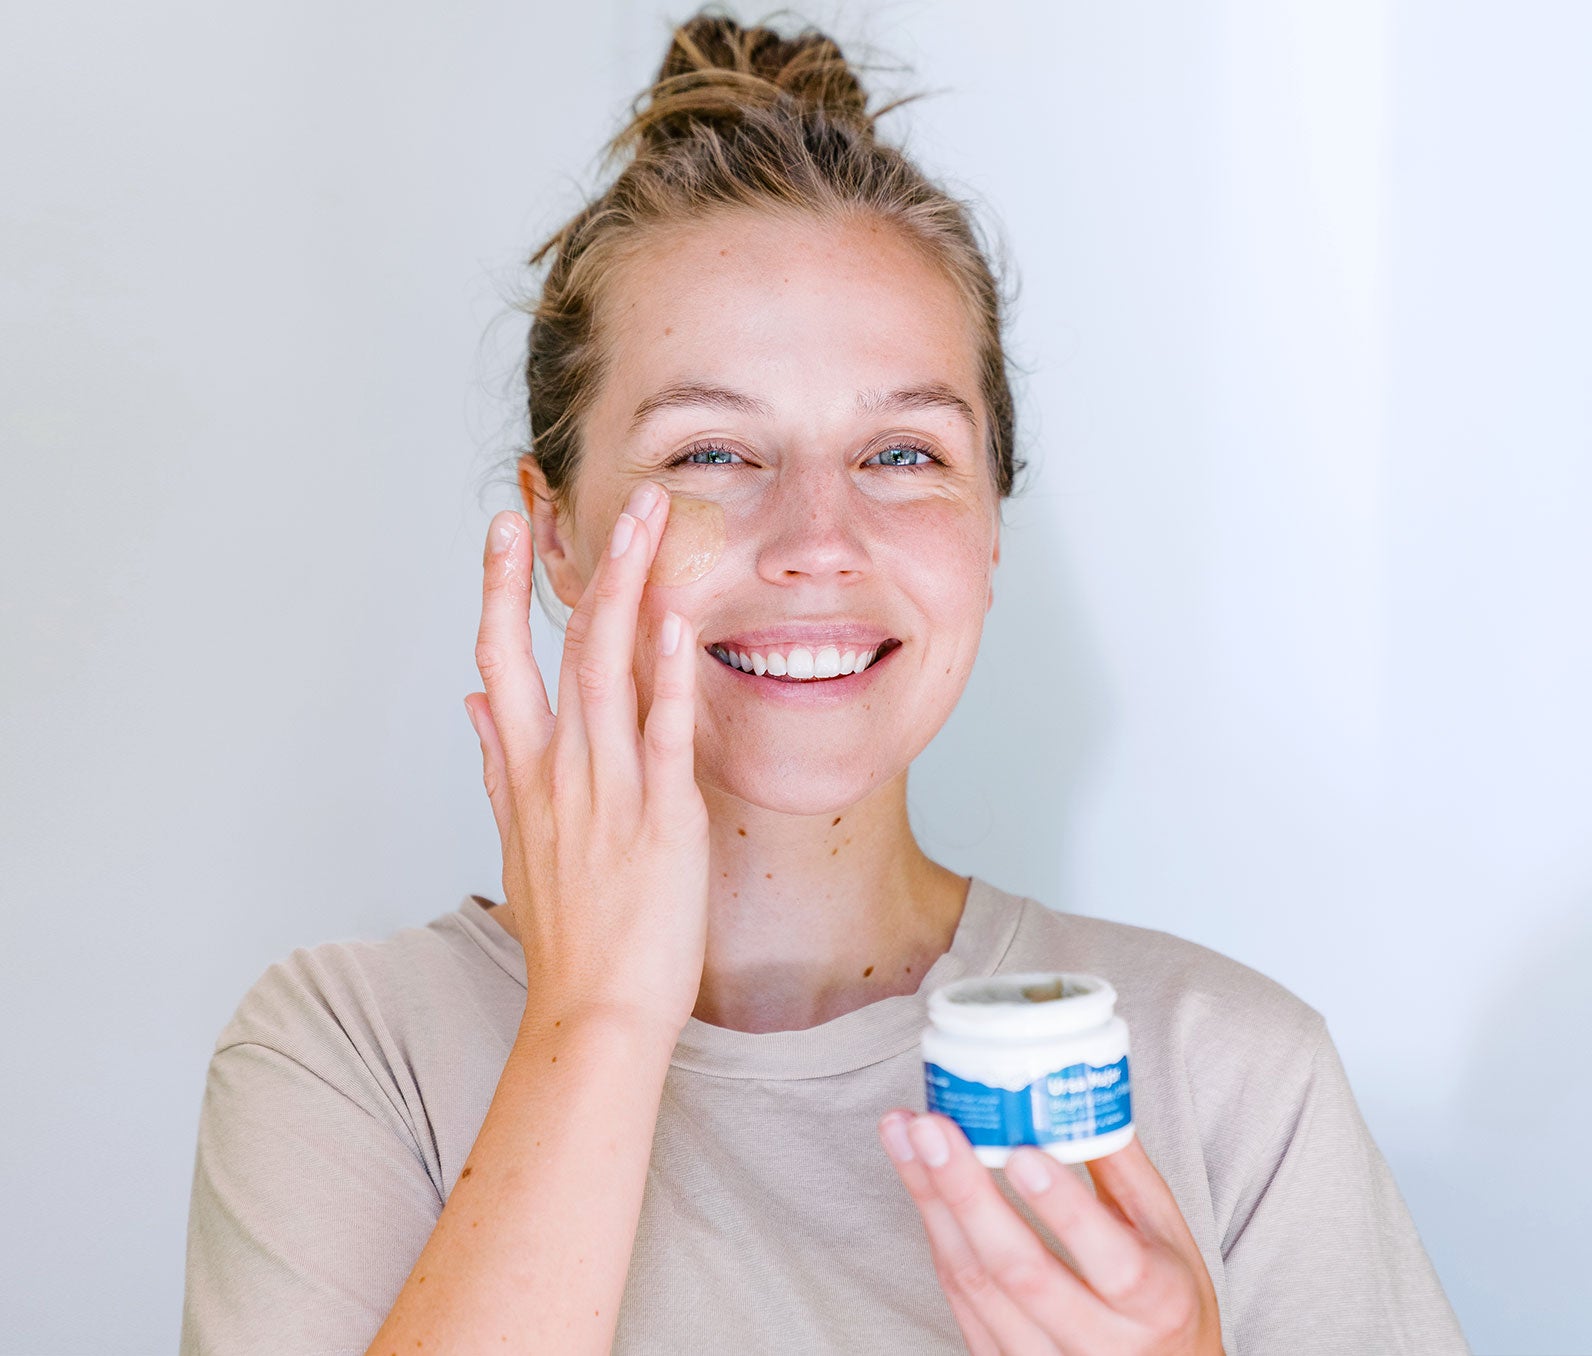 Bright & Easy 3-Minute Flash Mask